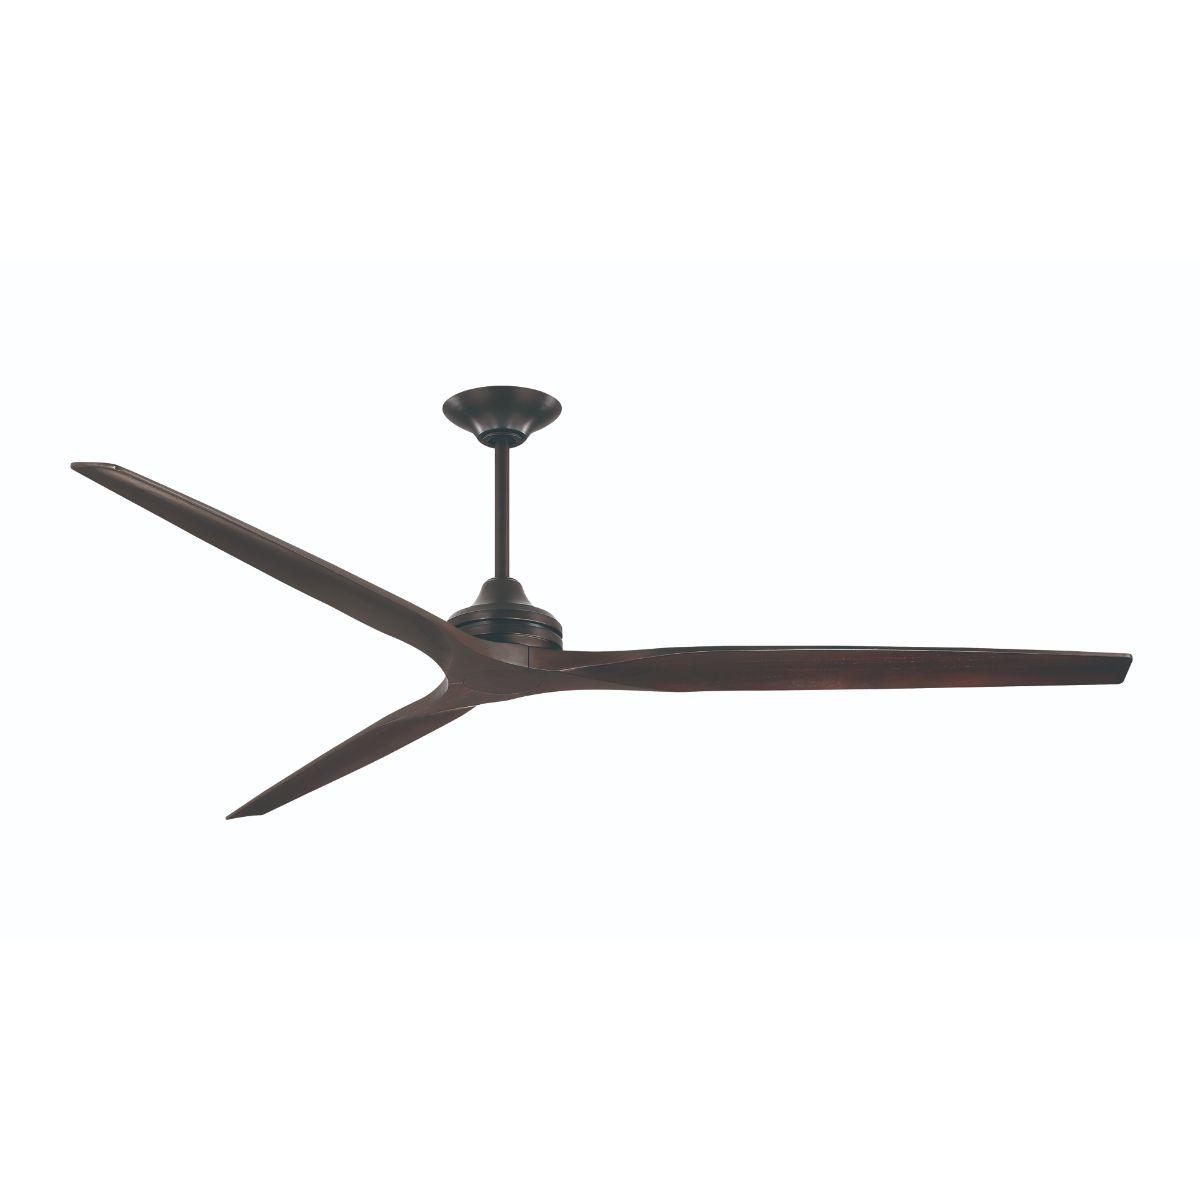 Spitfire DC Outdoor Ceiling Fan Motor With Remote, Set of 3 Blades Sold Separately - Bees Lighting